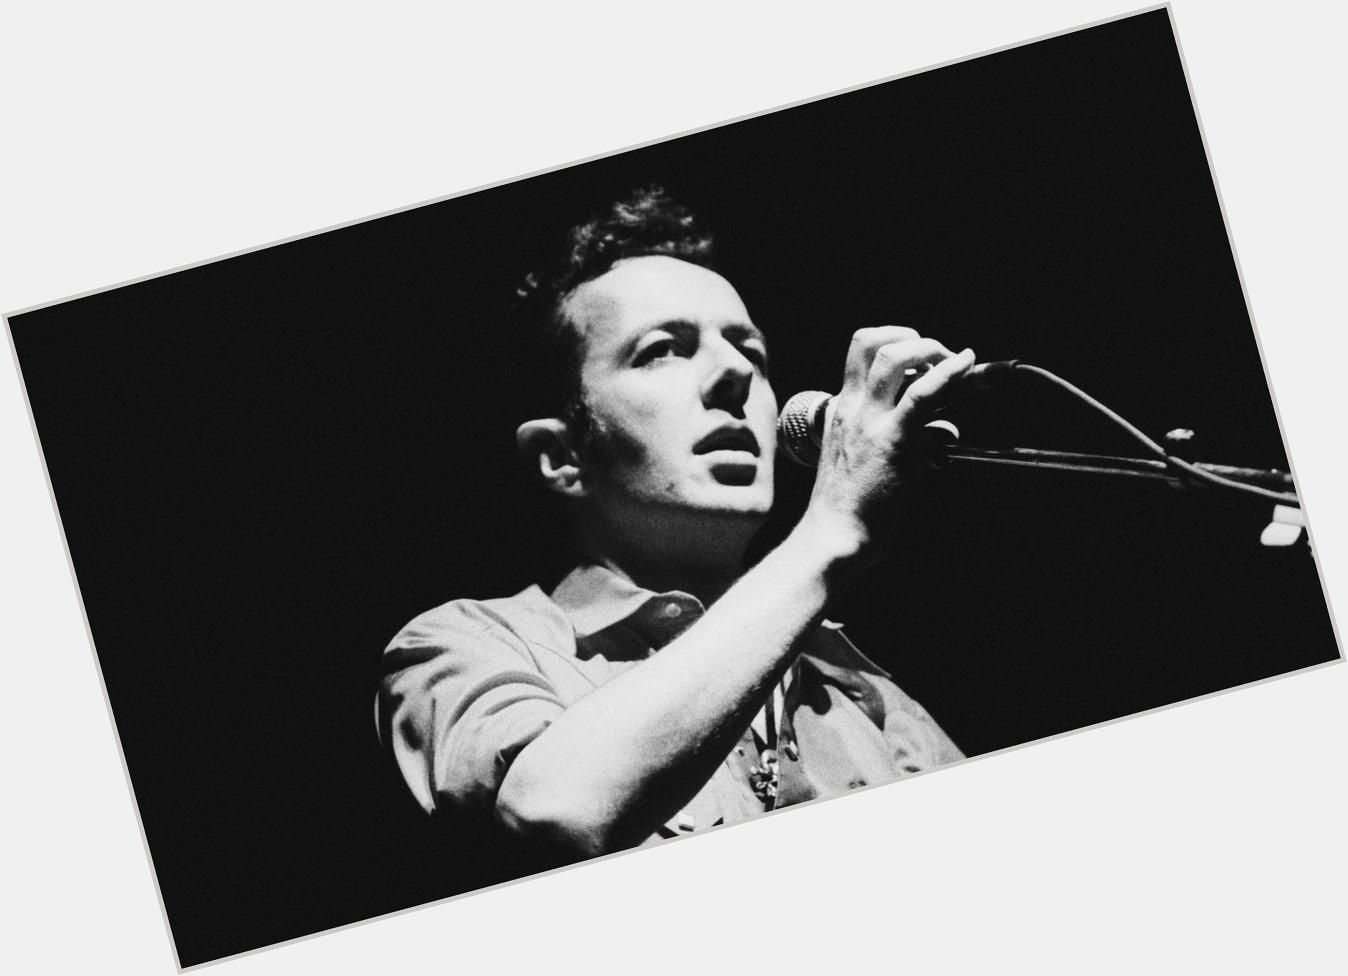 Happy Birthday to the one and only Joe Strummer. Joe would have been 65.  